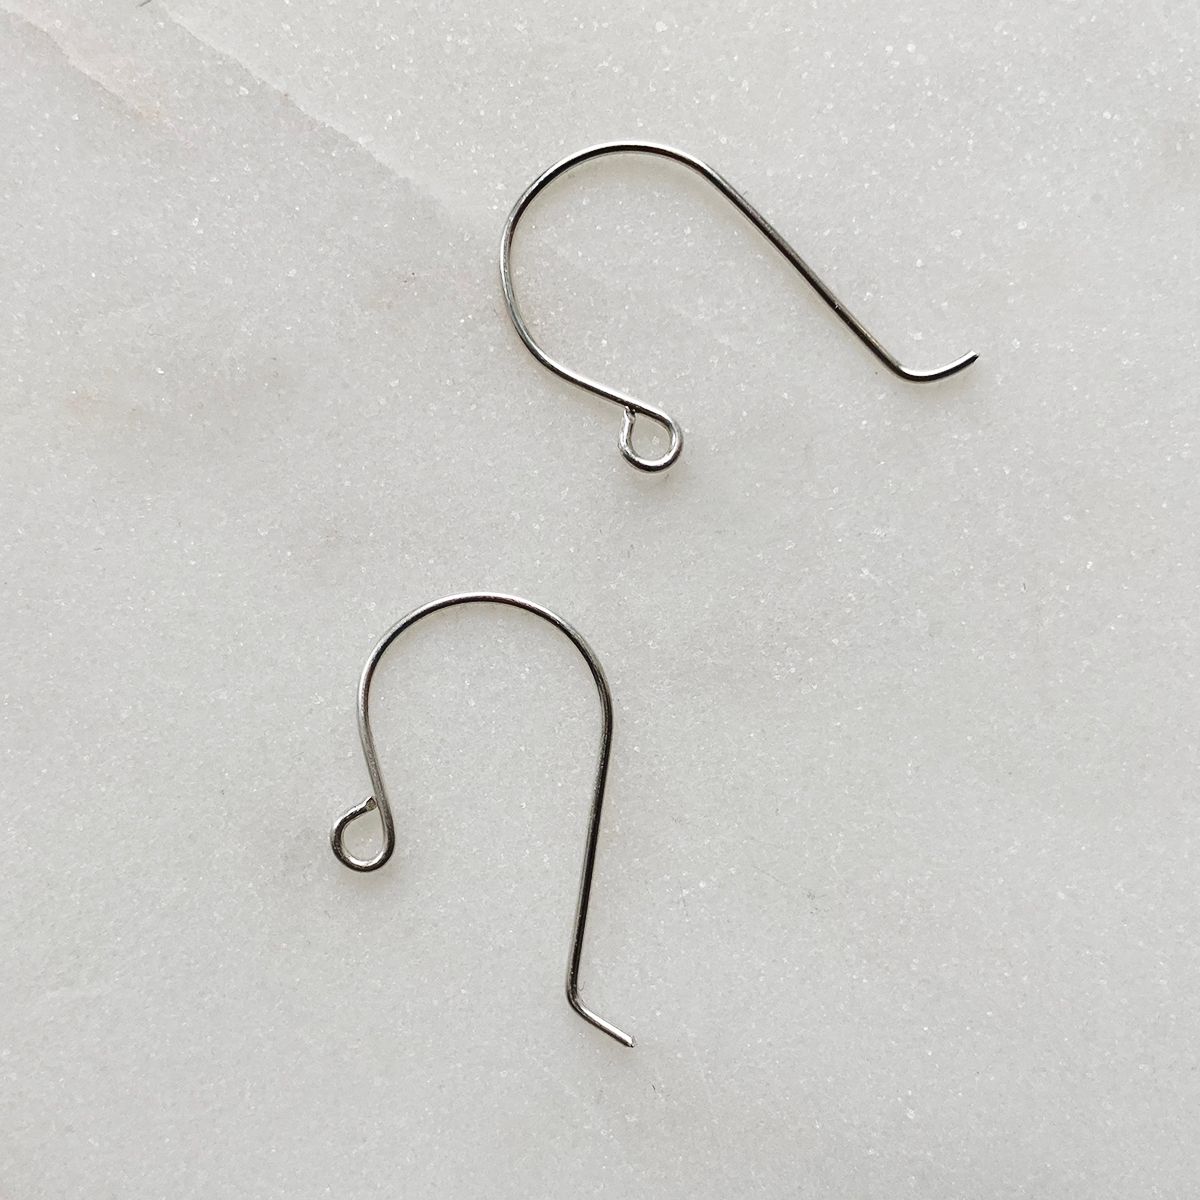 How To Make Earwires